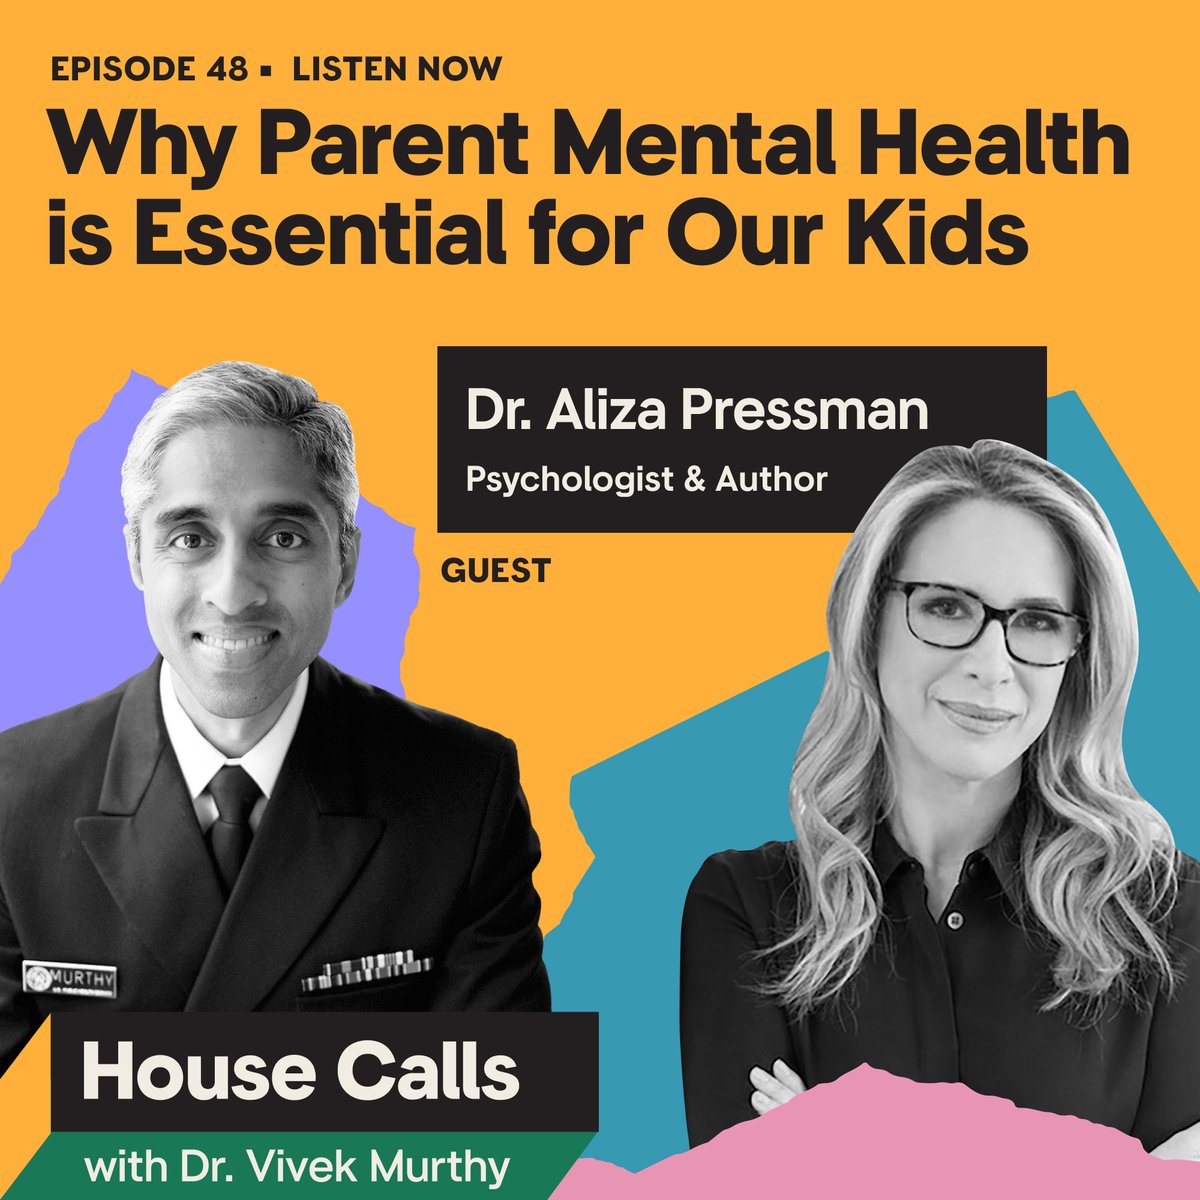 Parents, how do you care for your own mental health? Join me and psychologist Aliza Pressman on #HouseCallswithVivekMurthy as we talk about the joy and difficulties of parenting. And why self-compassion is important for our own mental health. Listen today! bit.ly/4dIvvIY